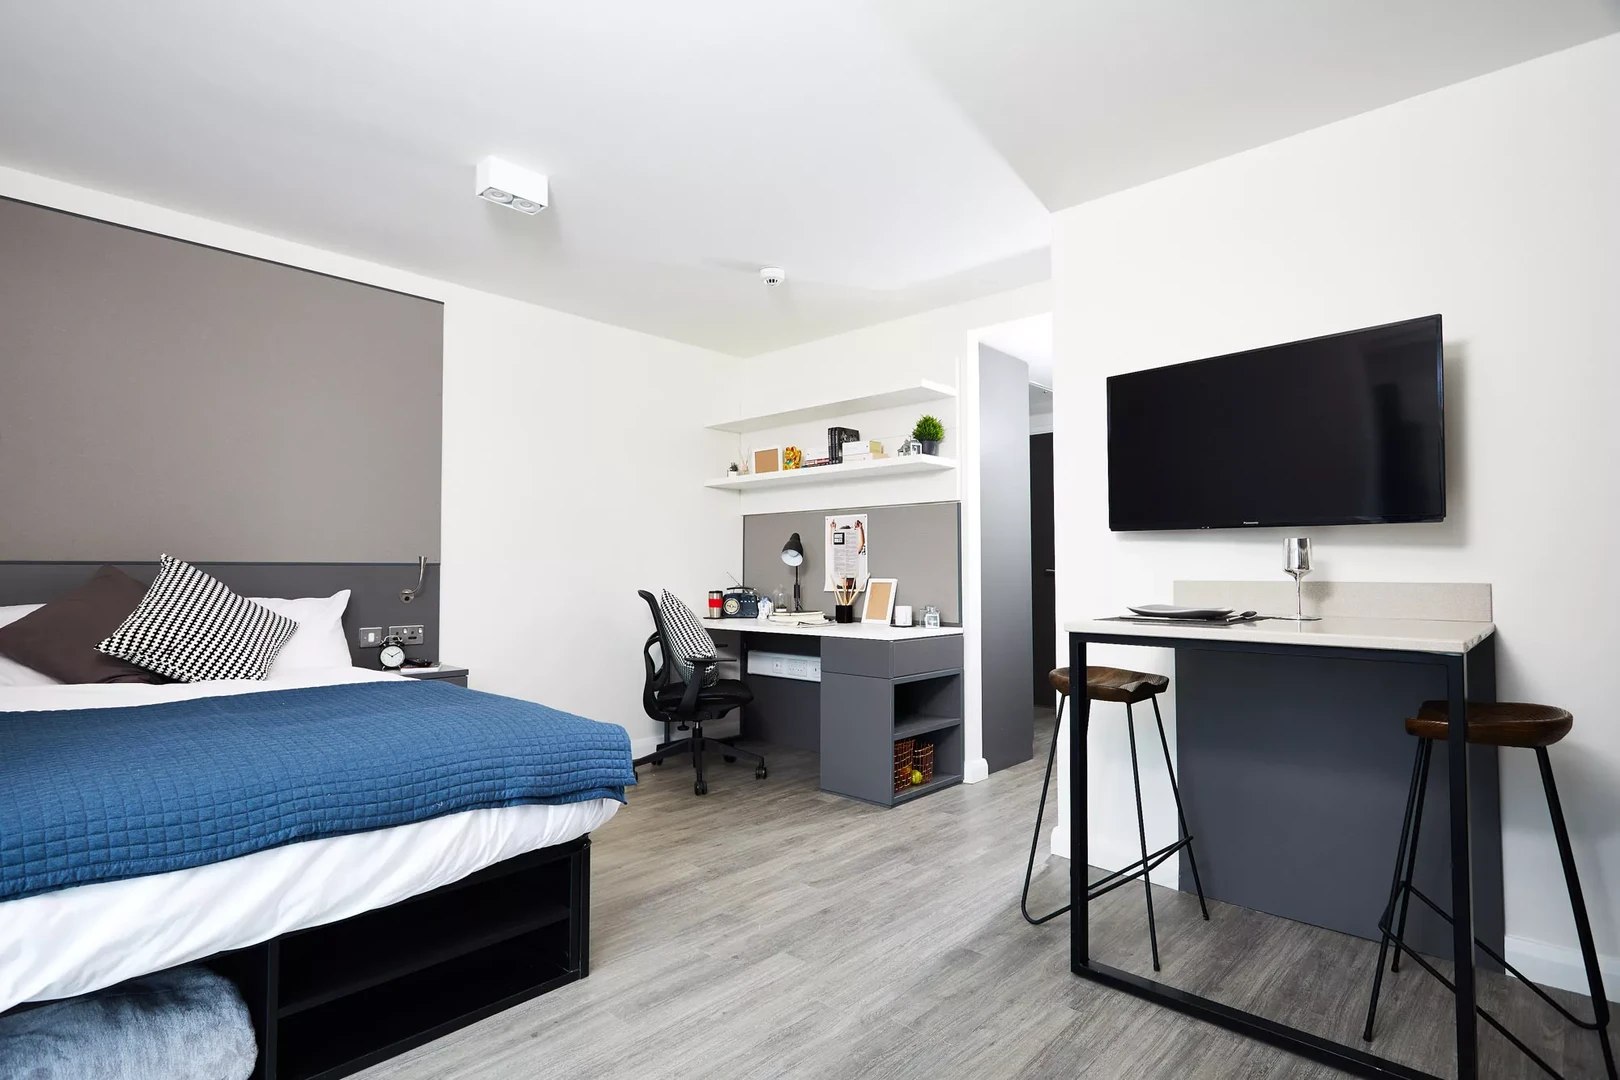 Renting rooms by the month in York